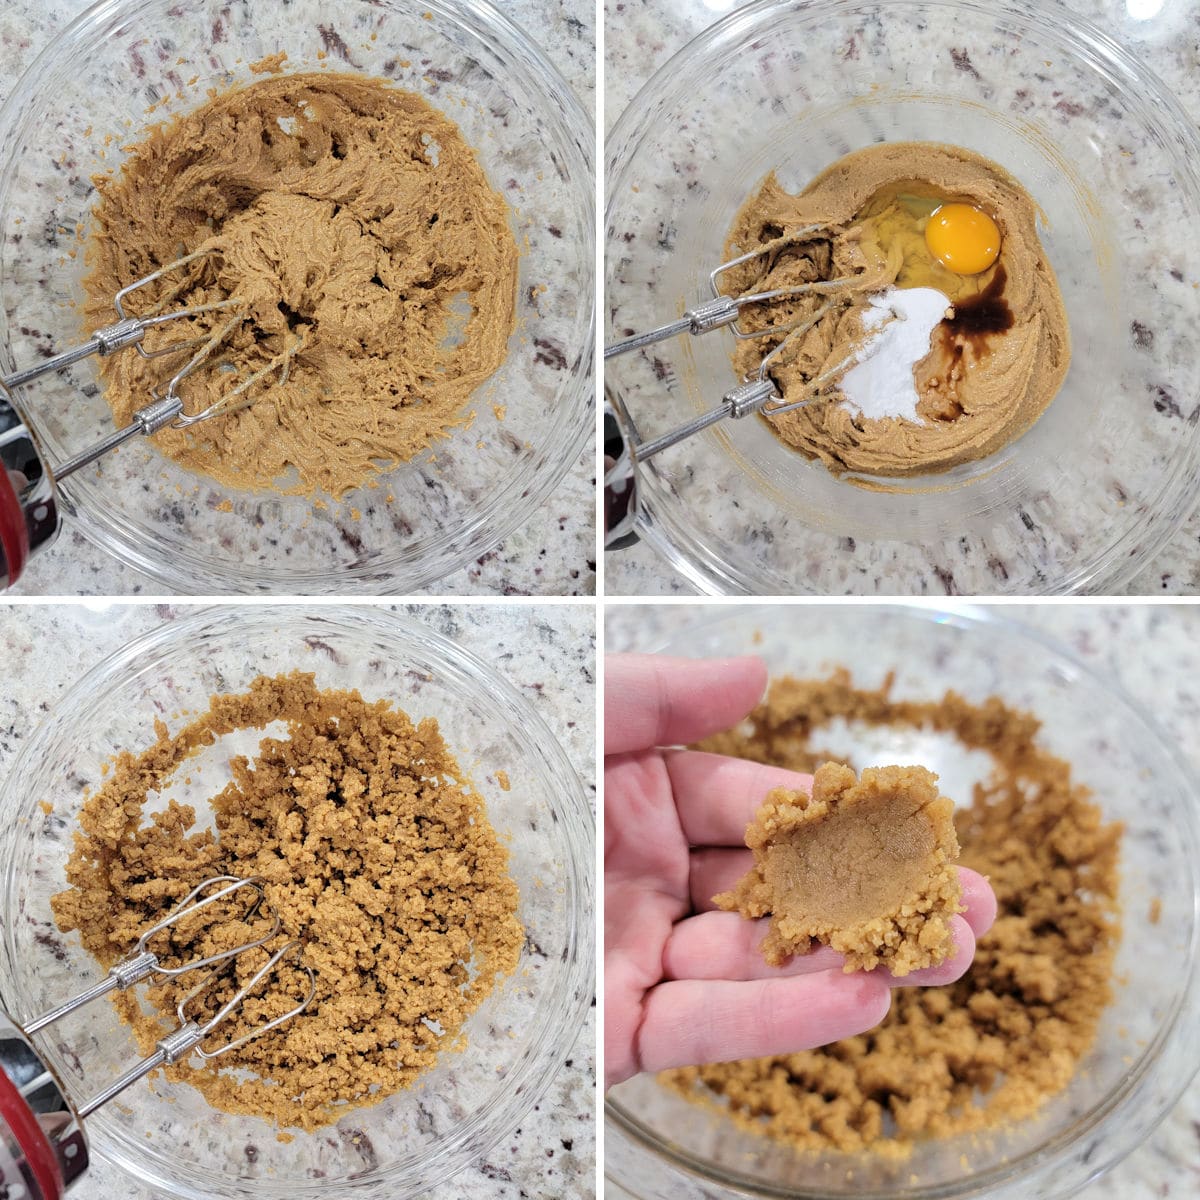 Mixing peanut butter cookie dough in a glass bowl.